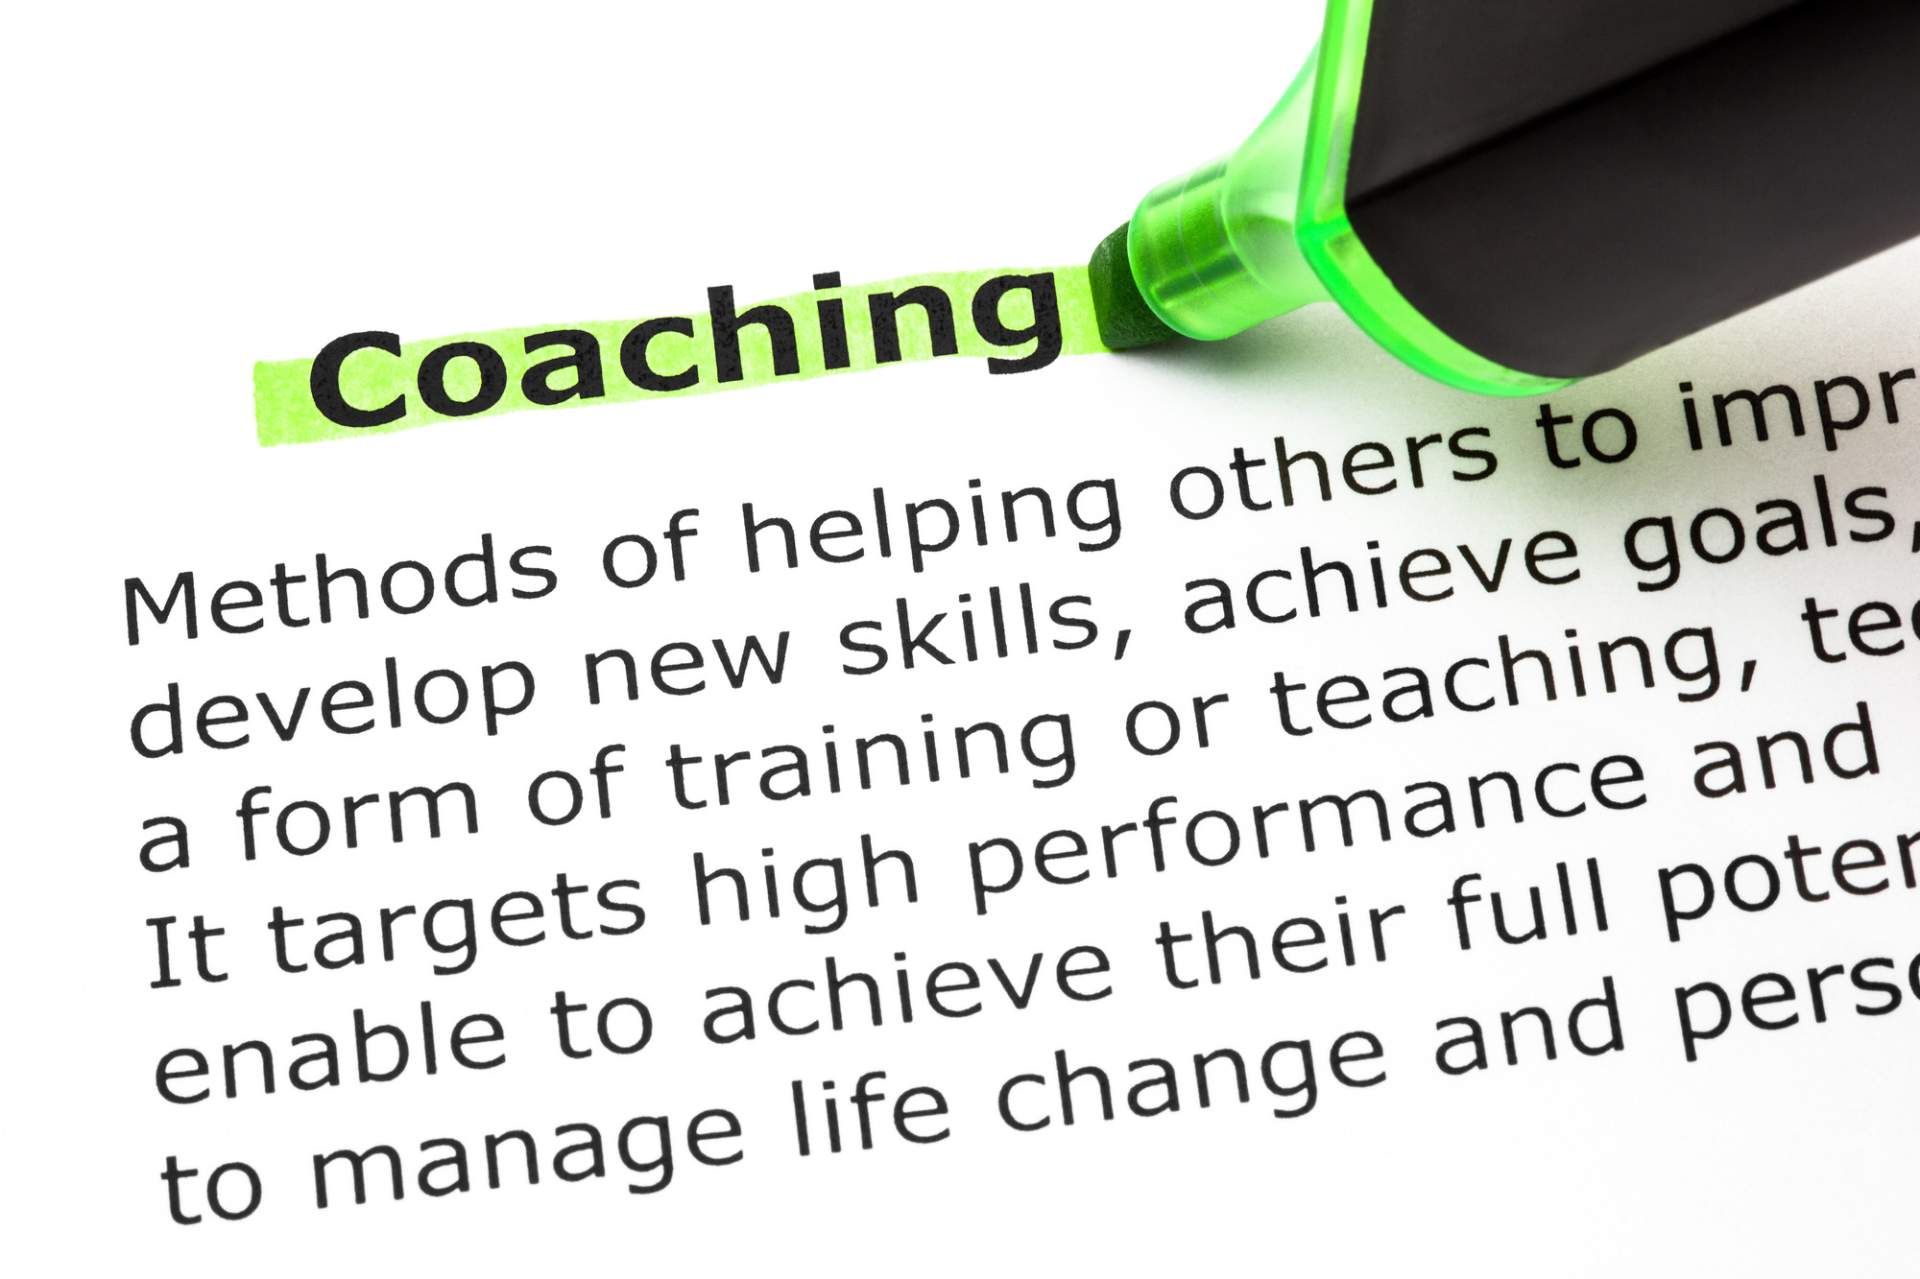 Coaching definition with the word, 'coaching' highlighted in green